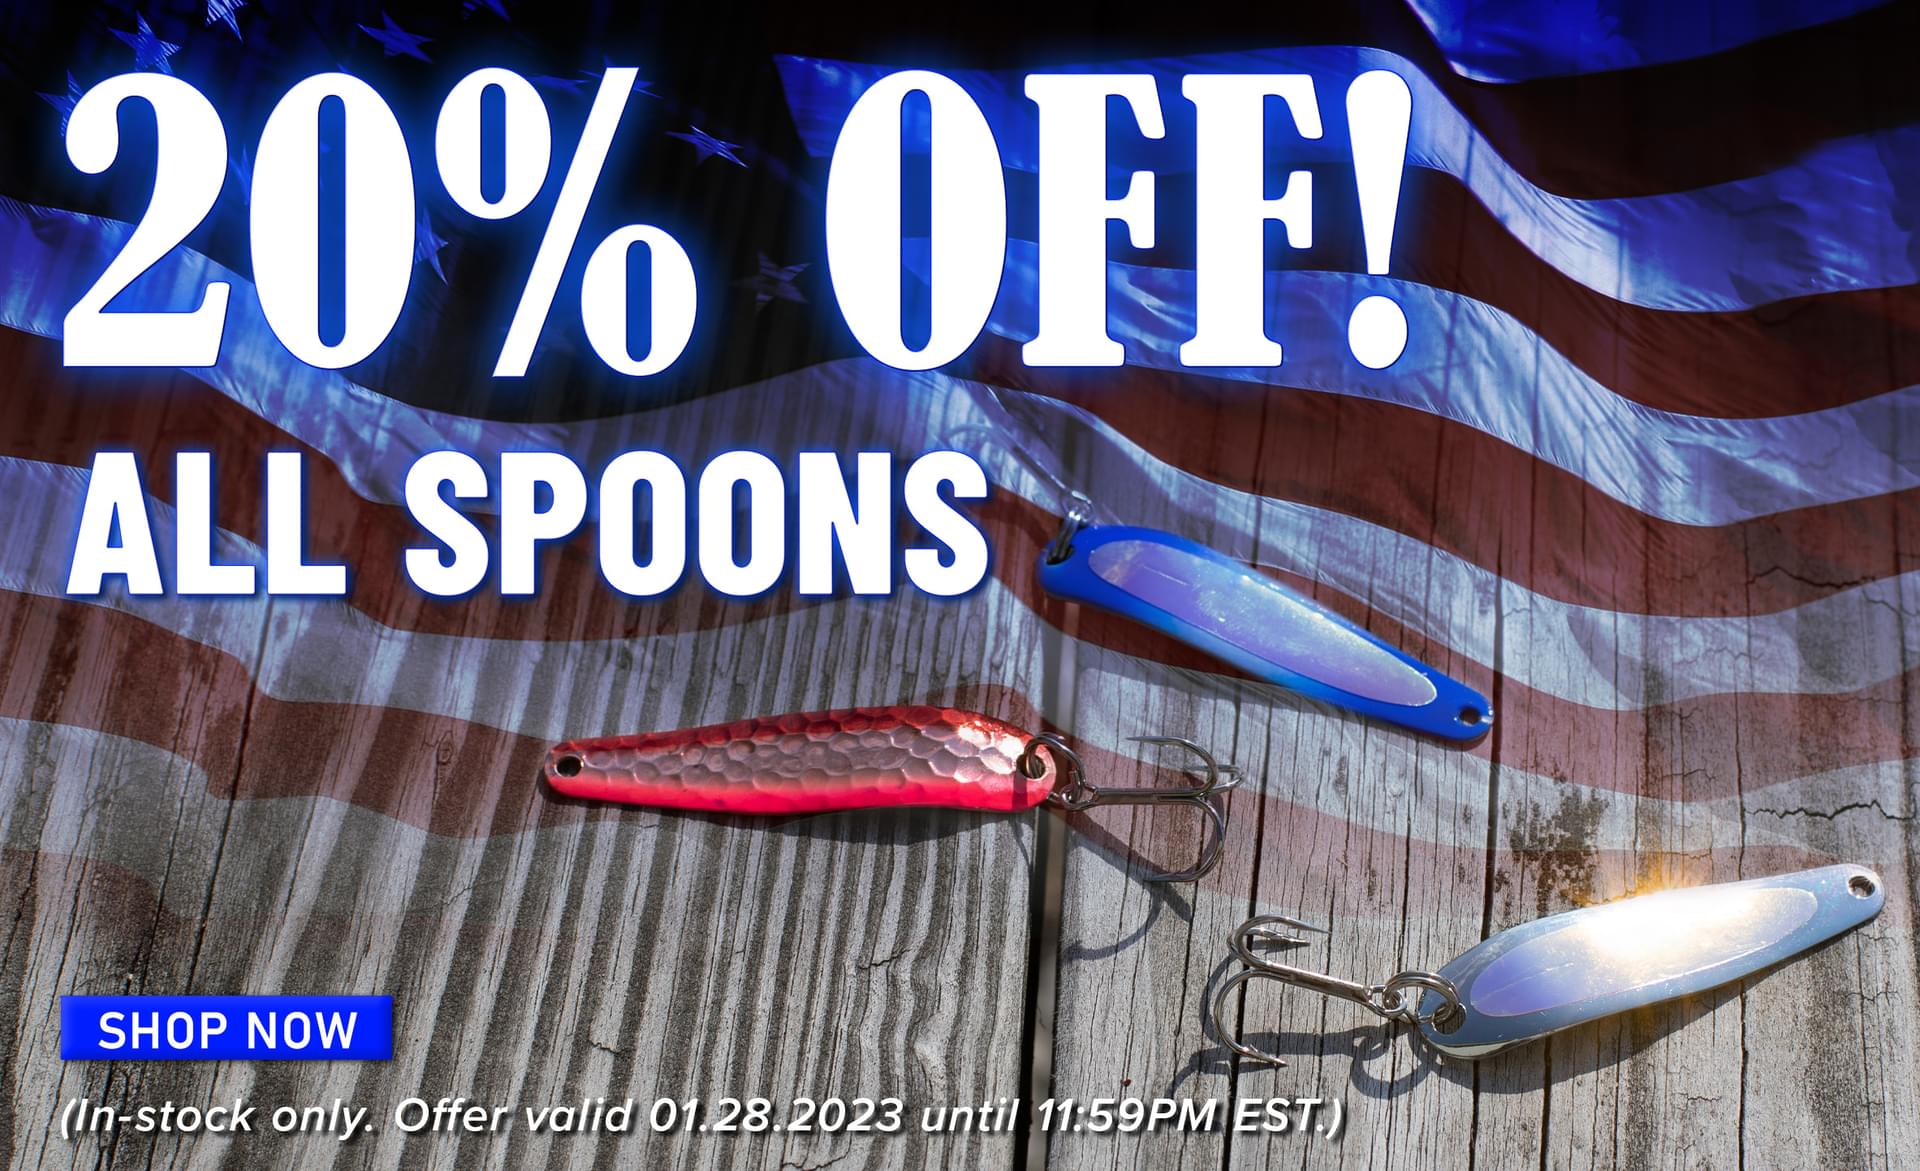 20% Off!  All Spoons  Shop Now (In-stock only. Offer valid 01.28.2023 until 11:59PM EST.)